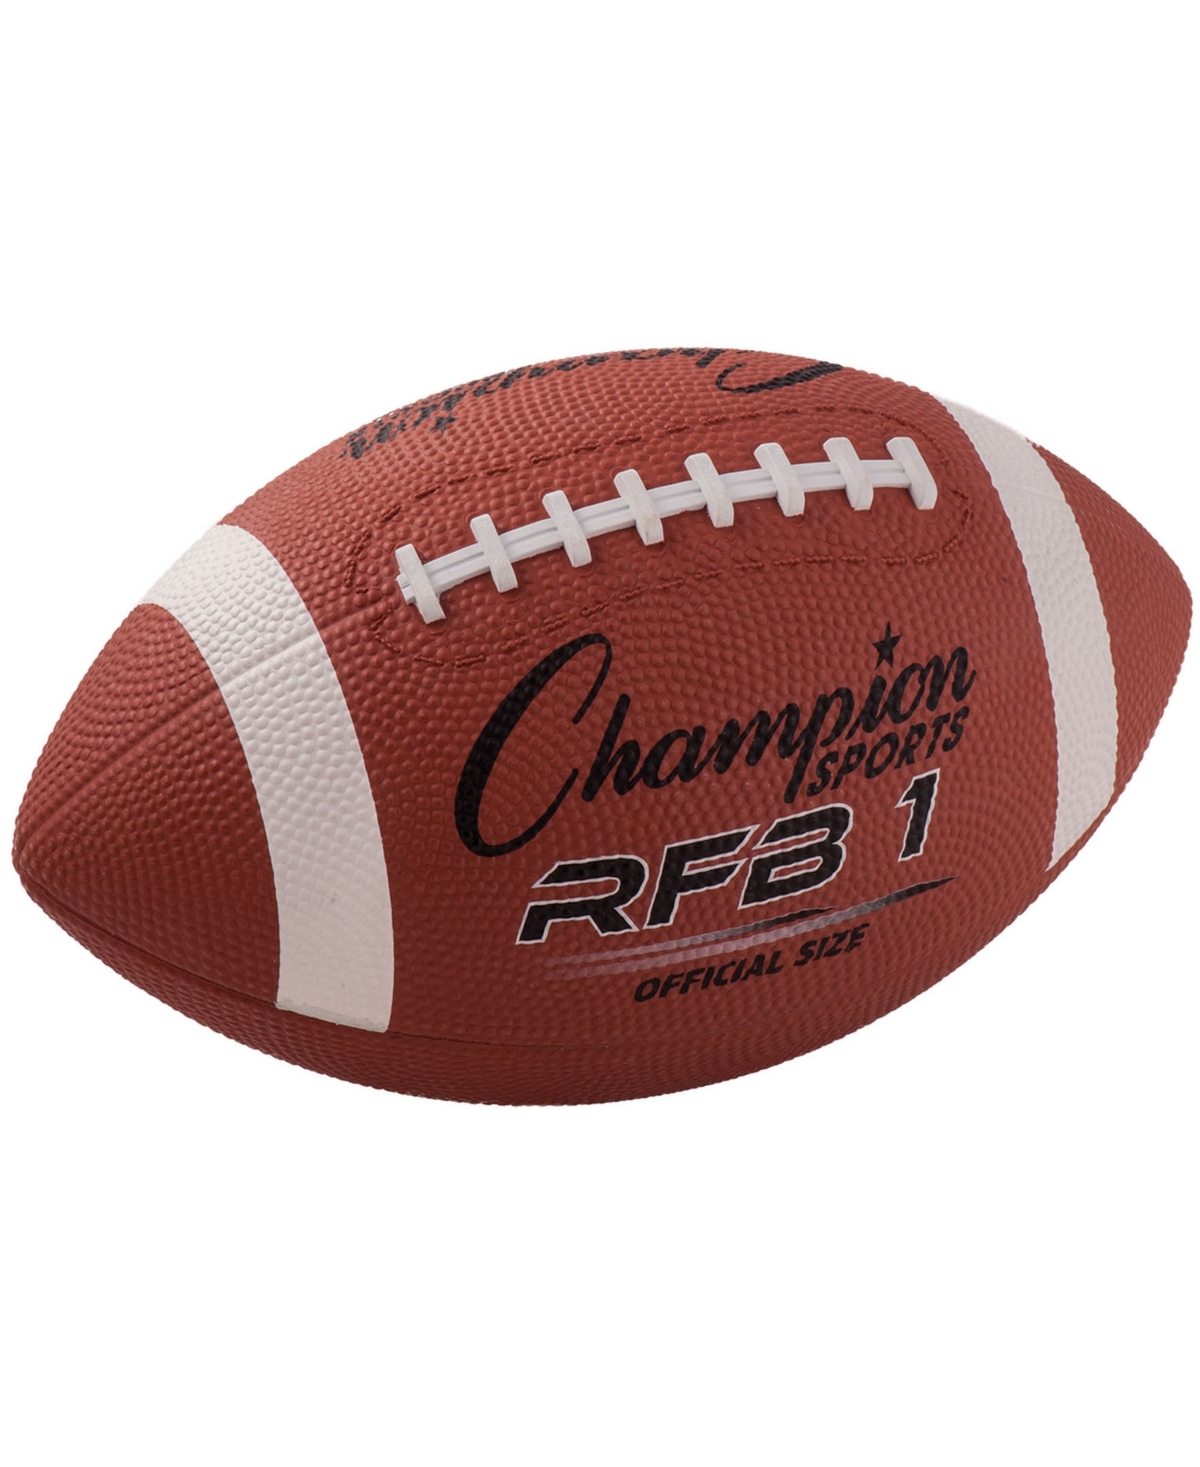 Champion Sports Rubber Football In Brown